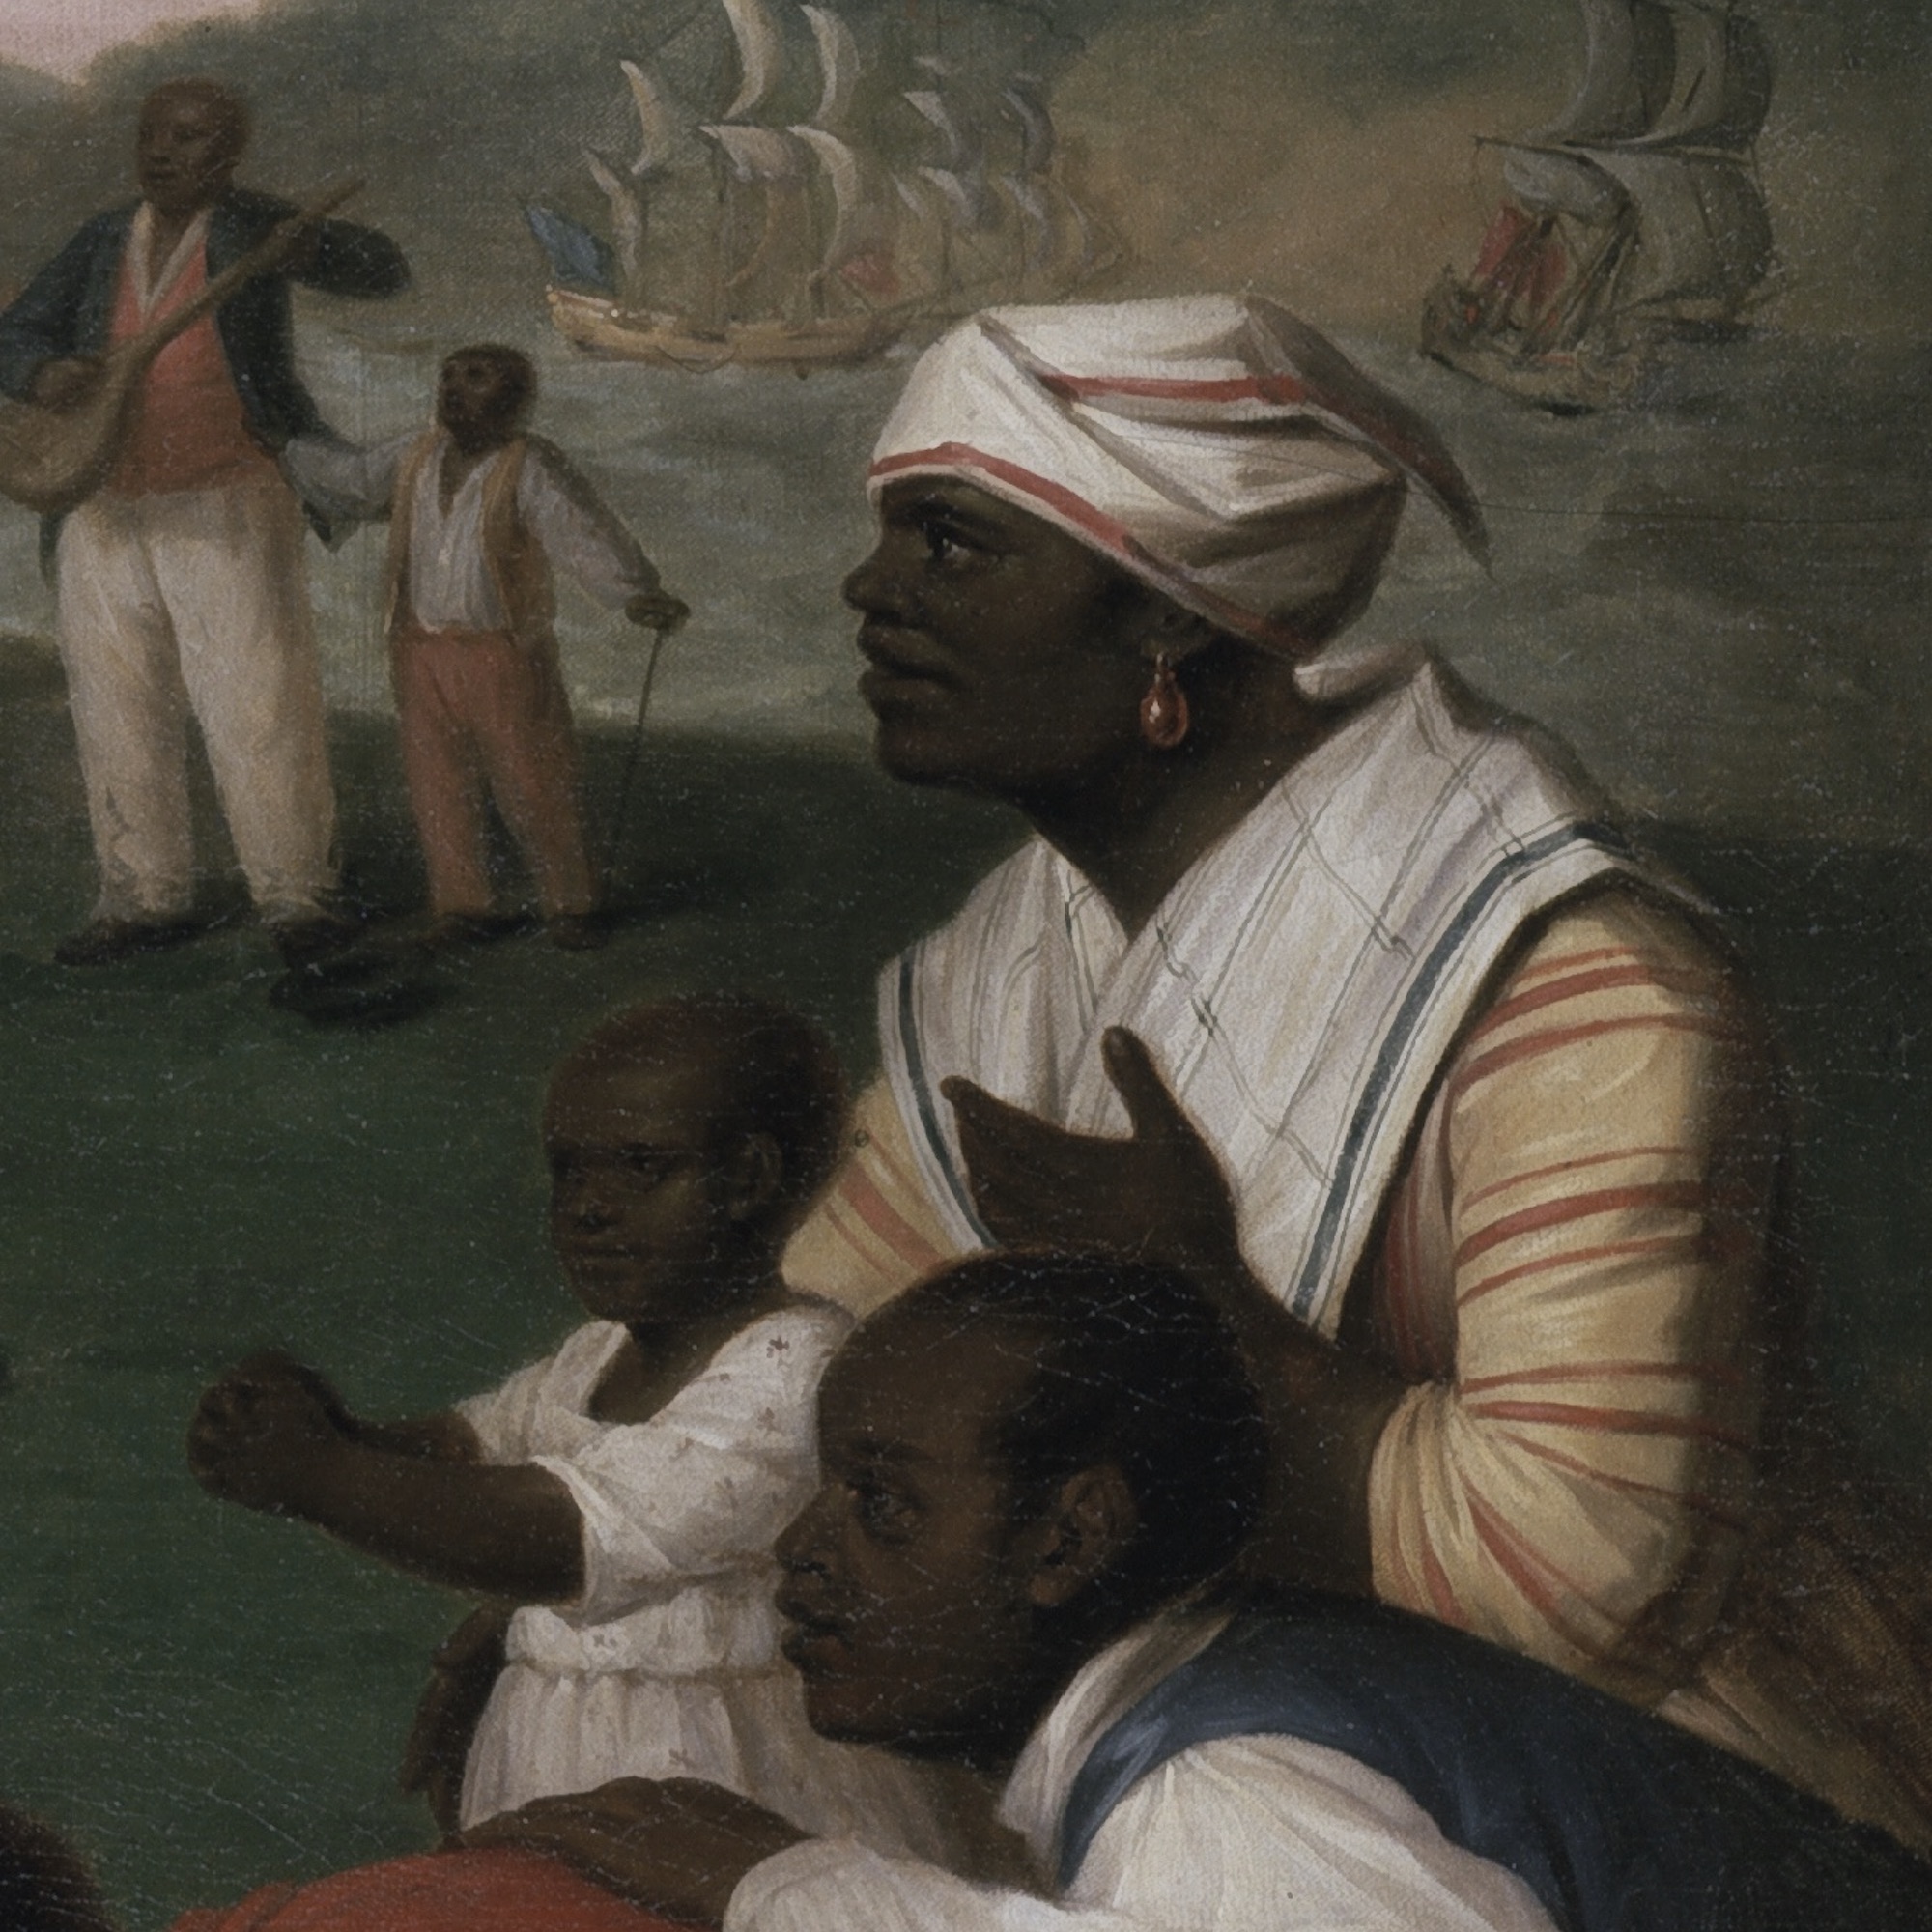 In this detail from Liberty Presenting the Arts and Sciences, the fine clothes of African Americans indicate that they enjoy the blessings of liberty.